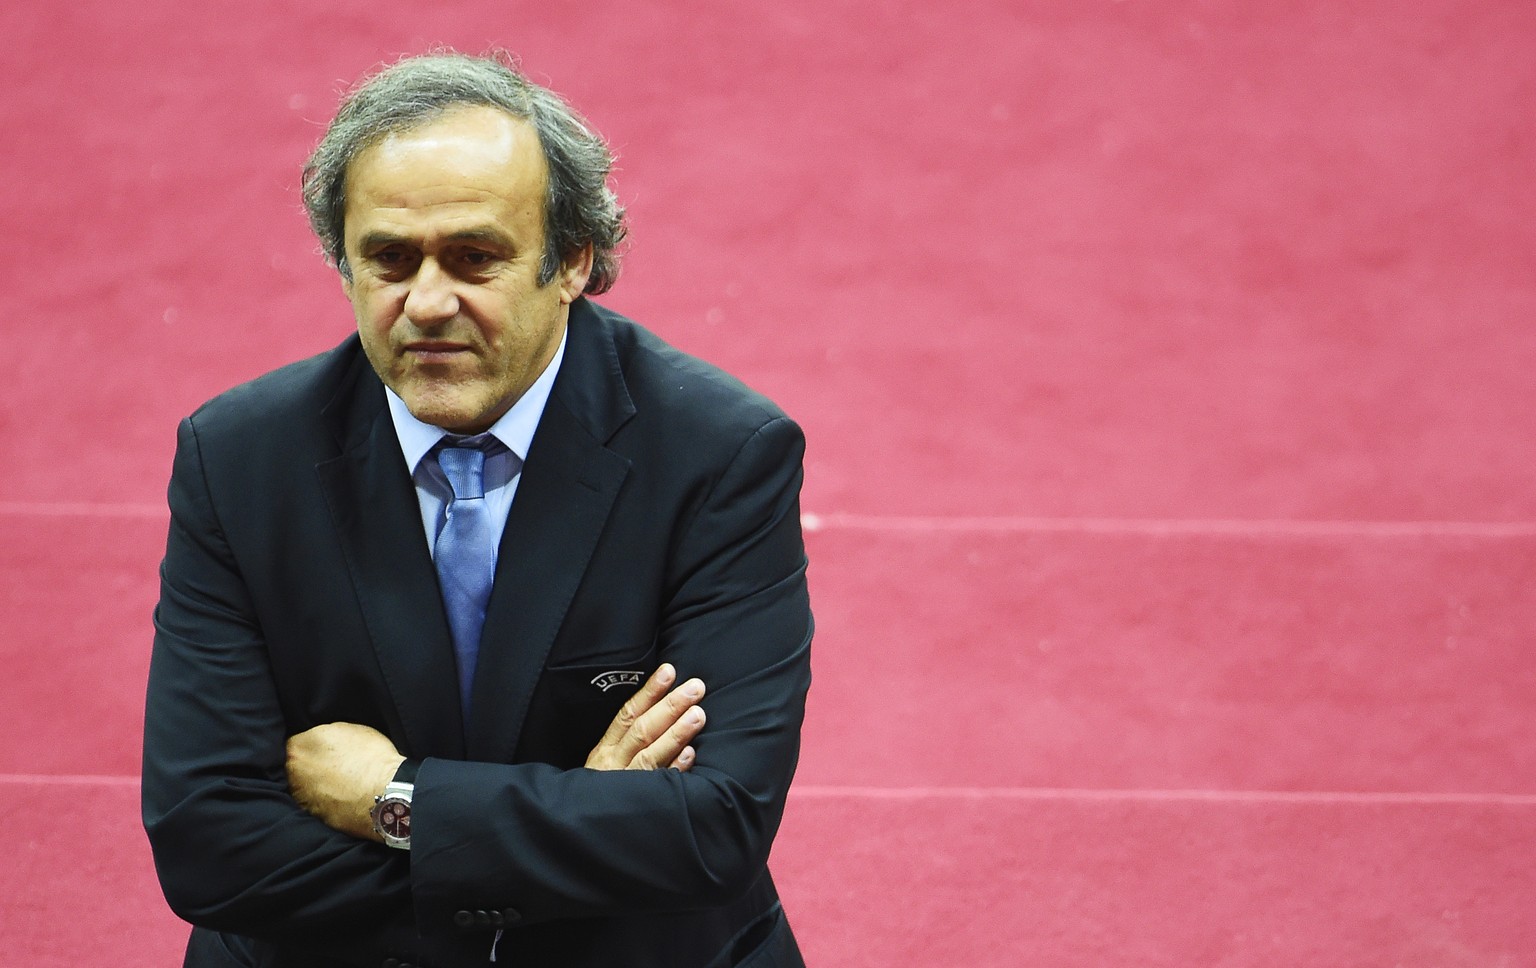 epa07655046 (FILE) - UEFA president Michel Platini attends the UEFA Europa League final between FC Dnipro Dnipropetrovsk and Sevilla FC at the National Stadium in Warsaw, Poland, 27 May 2015 (re-issue ...